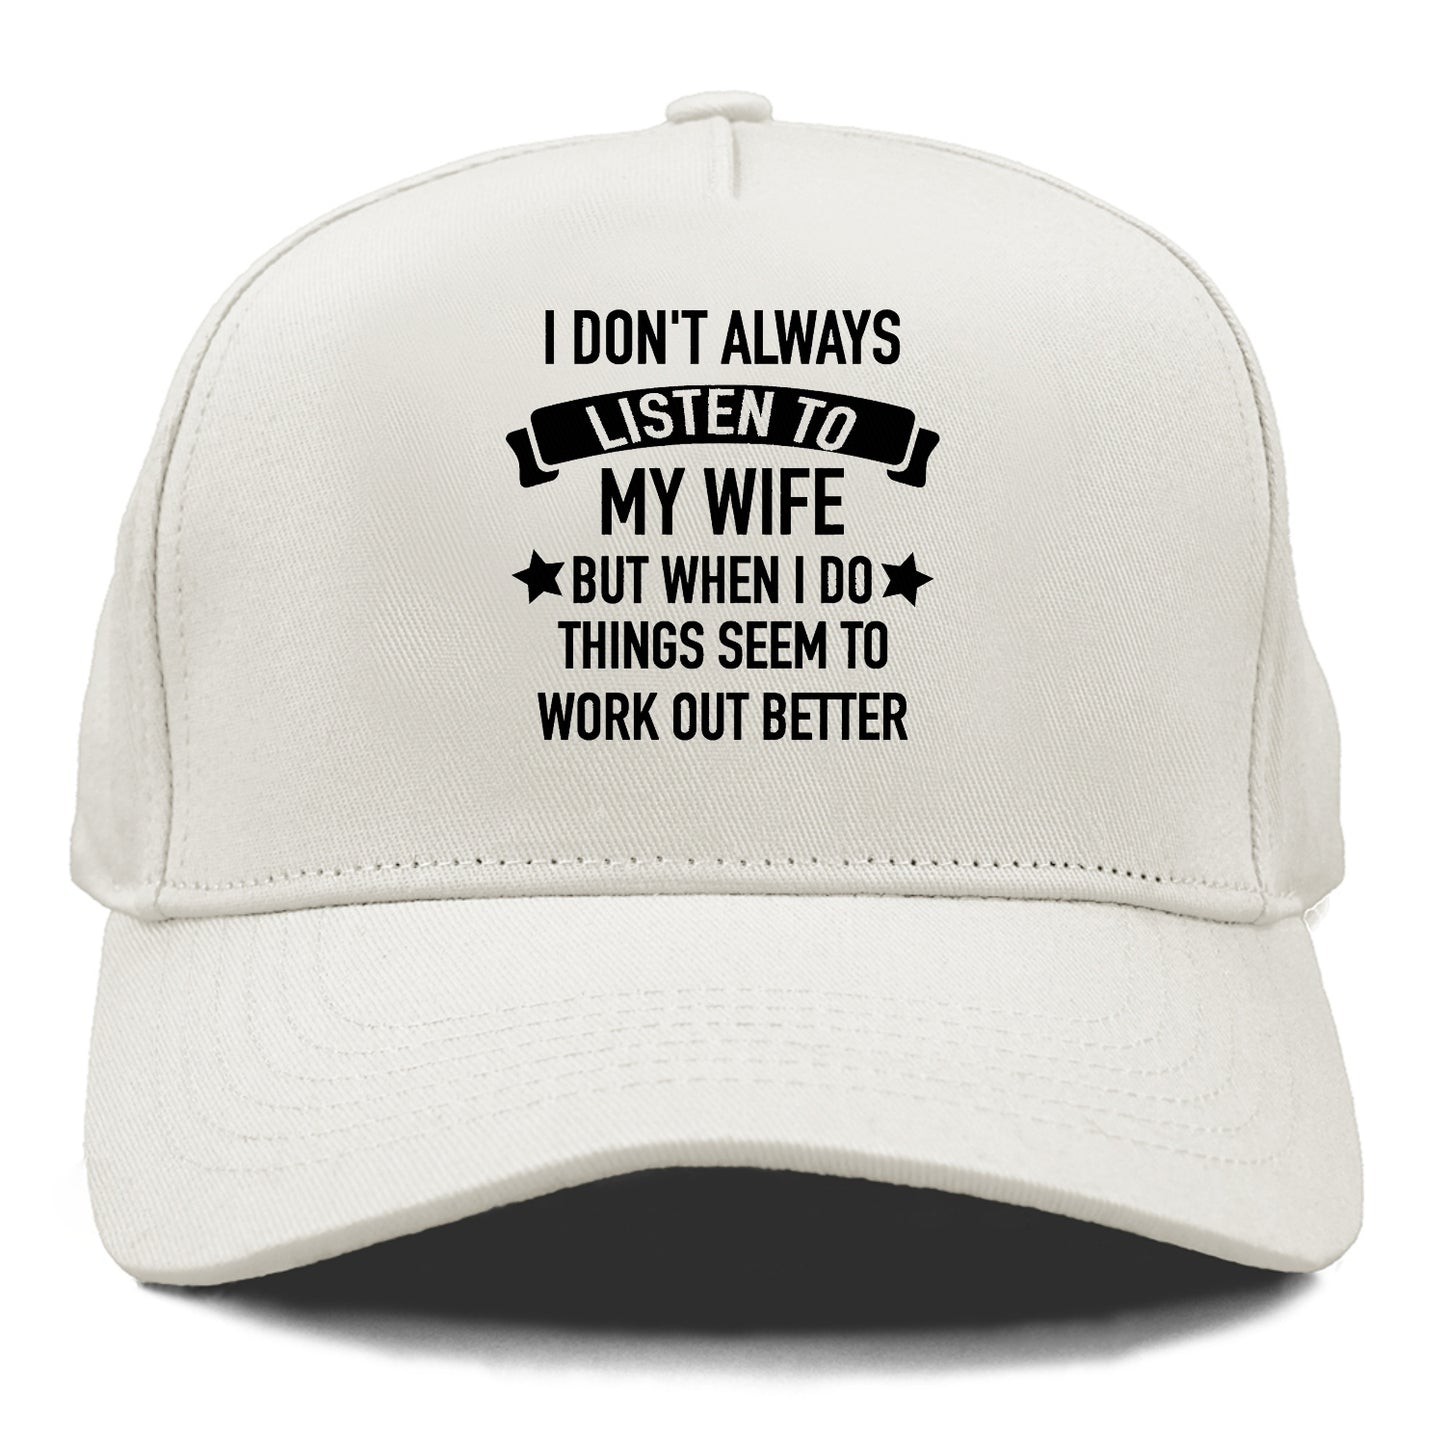 i don't always listen to my wife but when i do things seem to work out better Hat